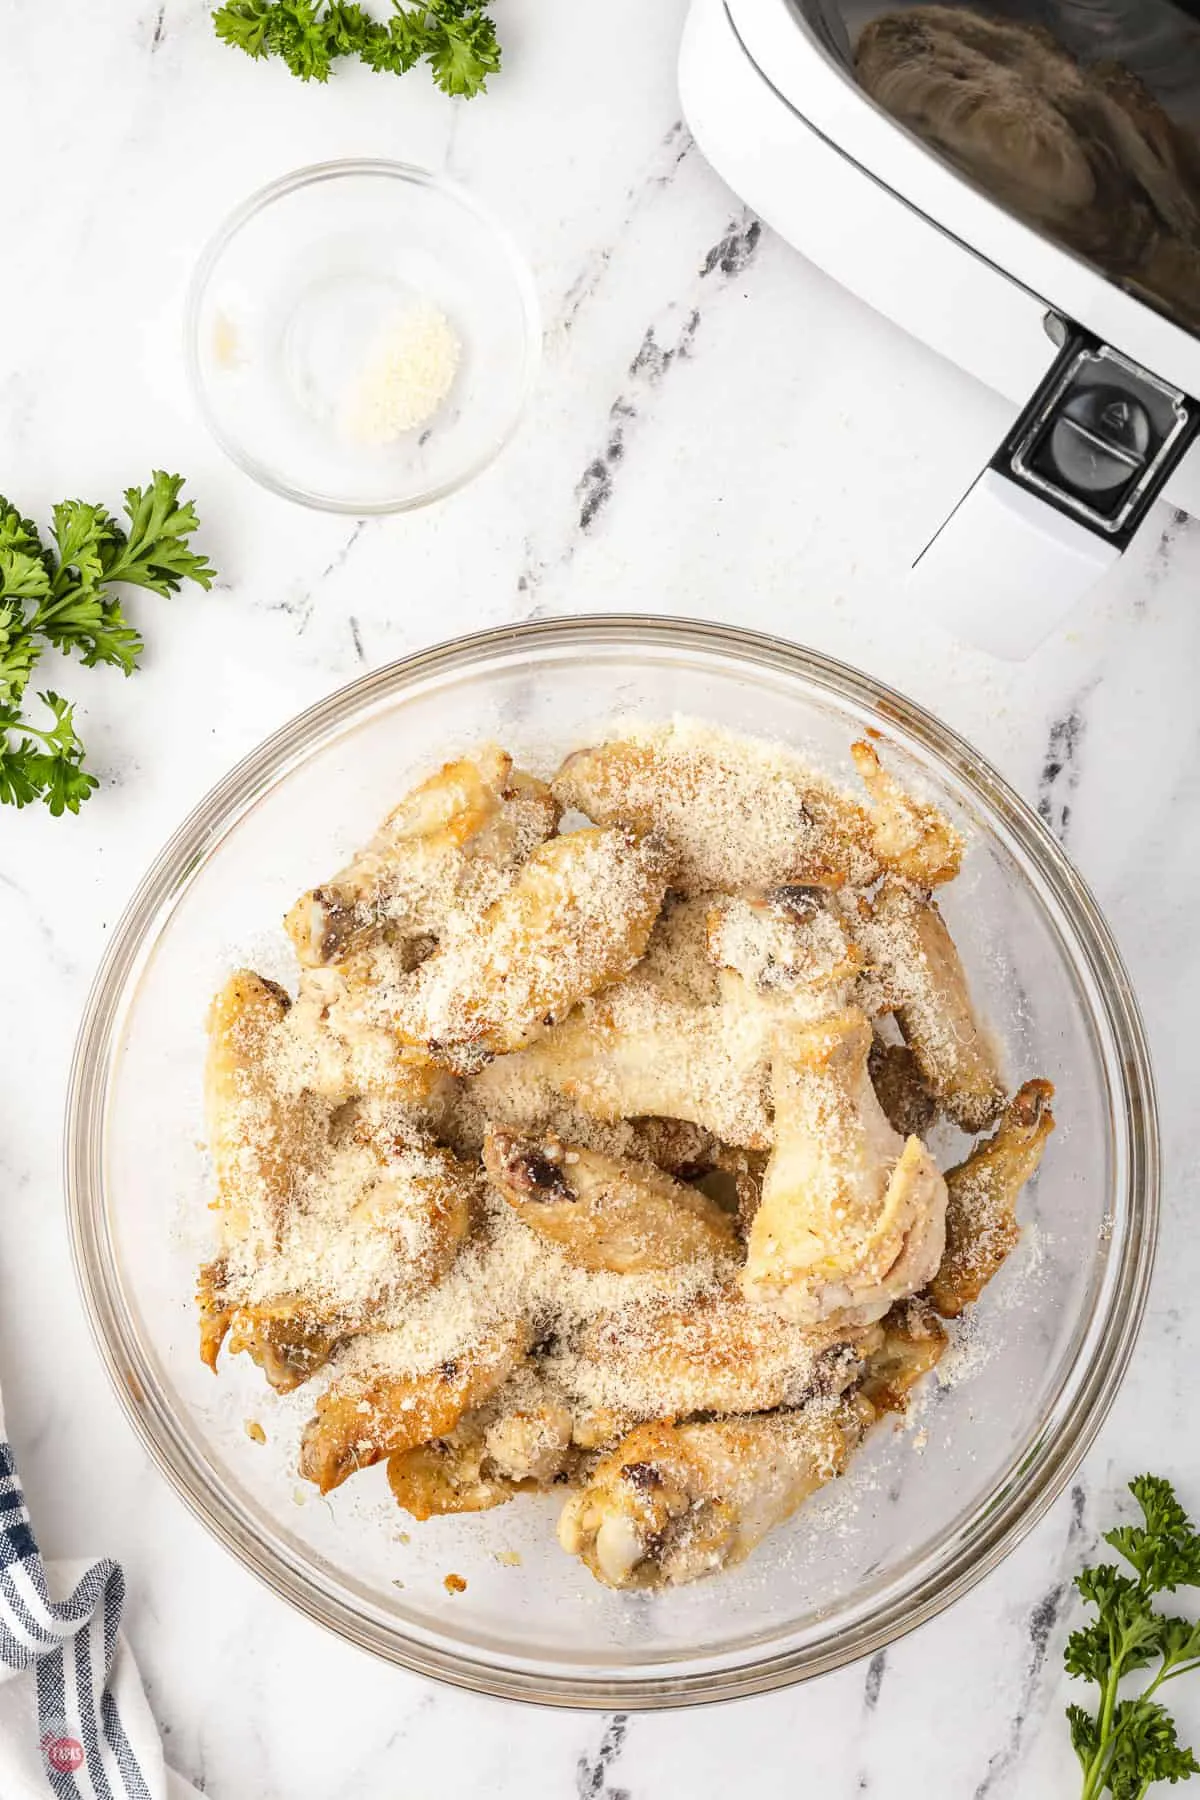 fried wings in a bowl with parmesan cheese sprinkled on